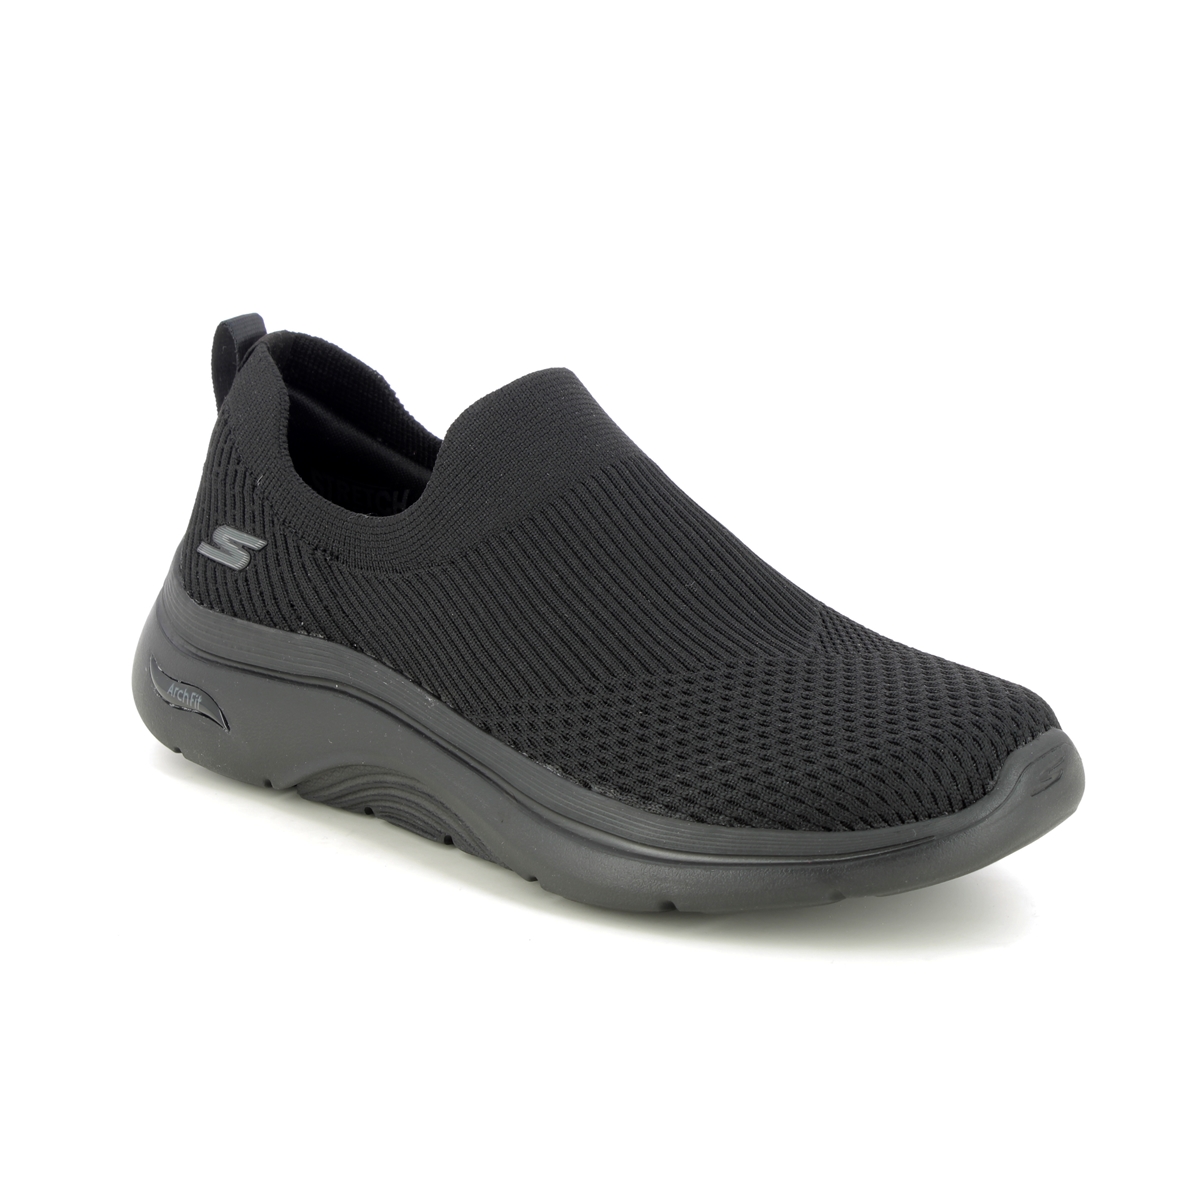 Skechers Arch Fit 2 Slip BBK Black Womens trainers 125300 in a Plain Textile in Size 4